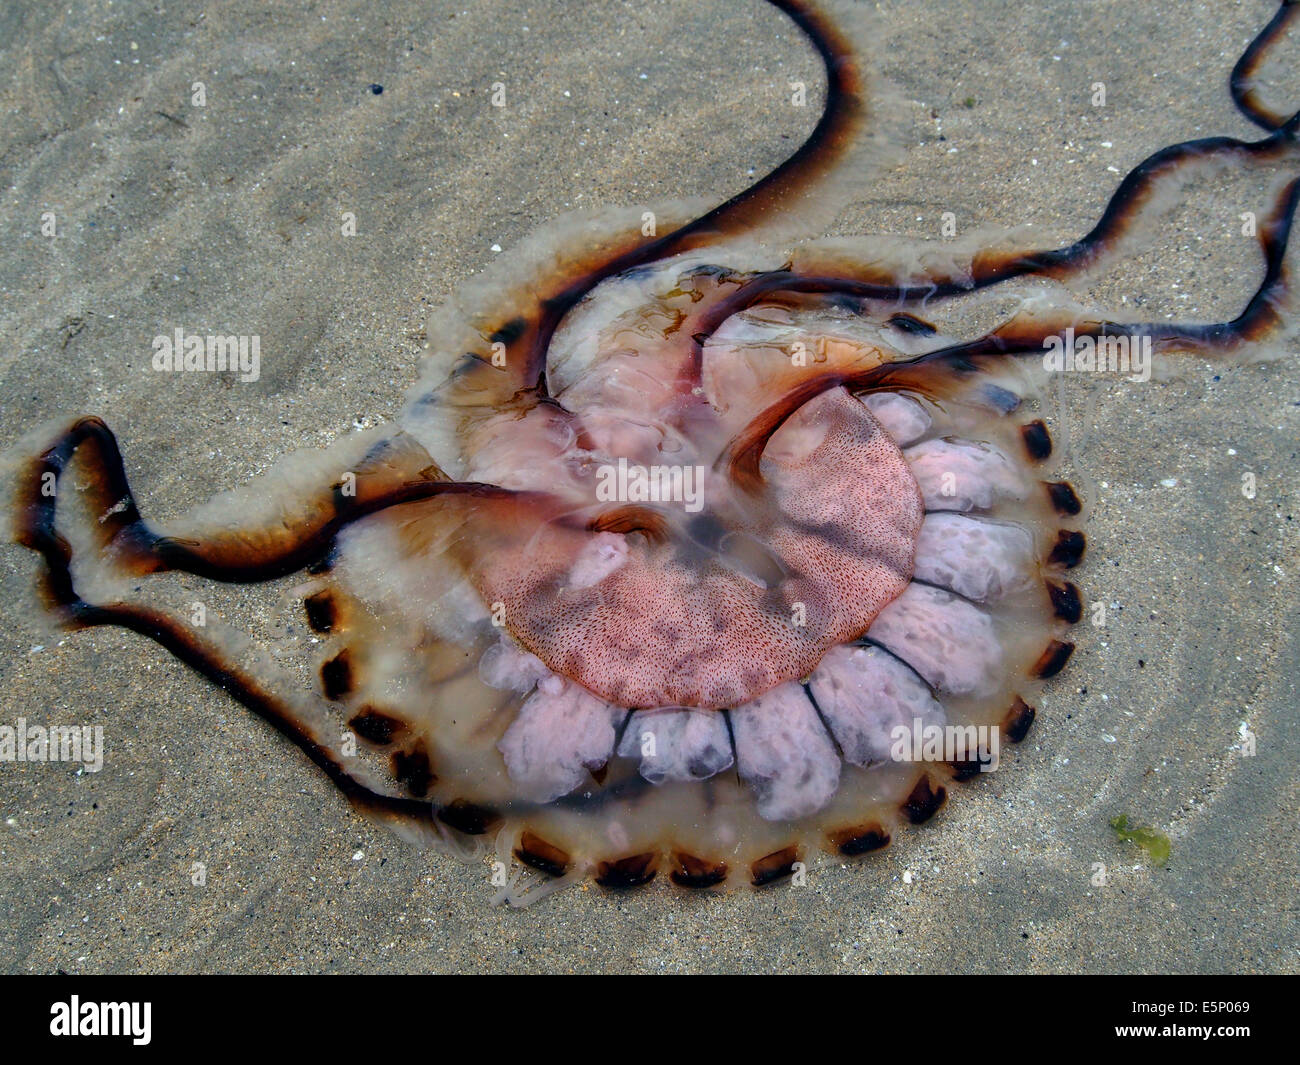 Underside of Chrysaora hysoscella, also known as the compass jellyfish washed up on the beach at Mullaghmore, Ireland Stock Photo